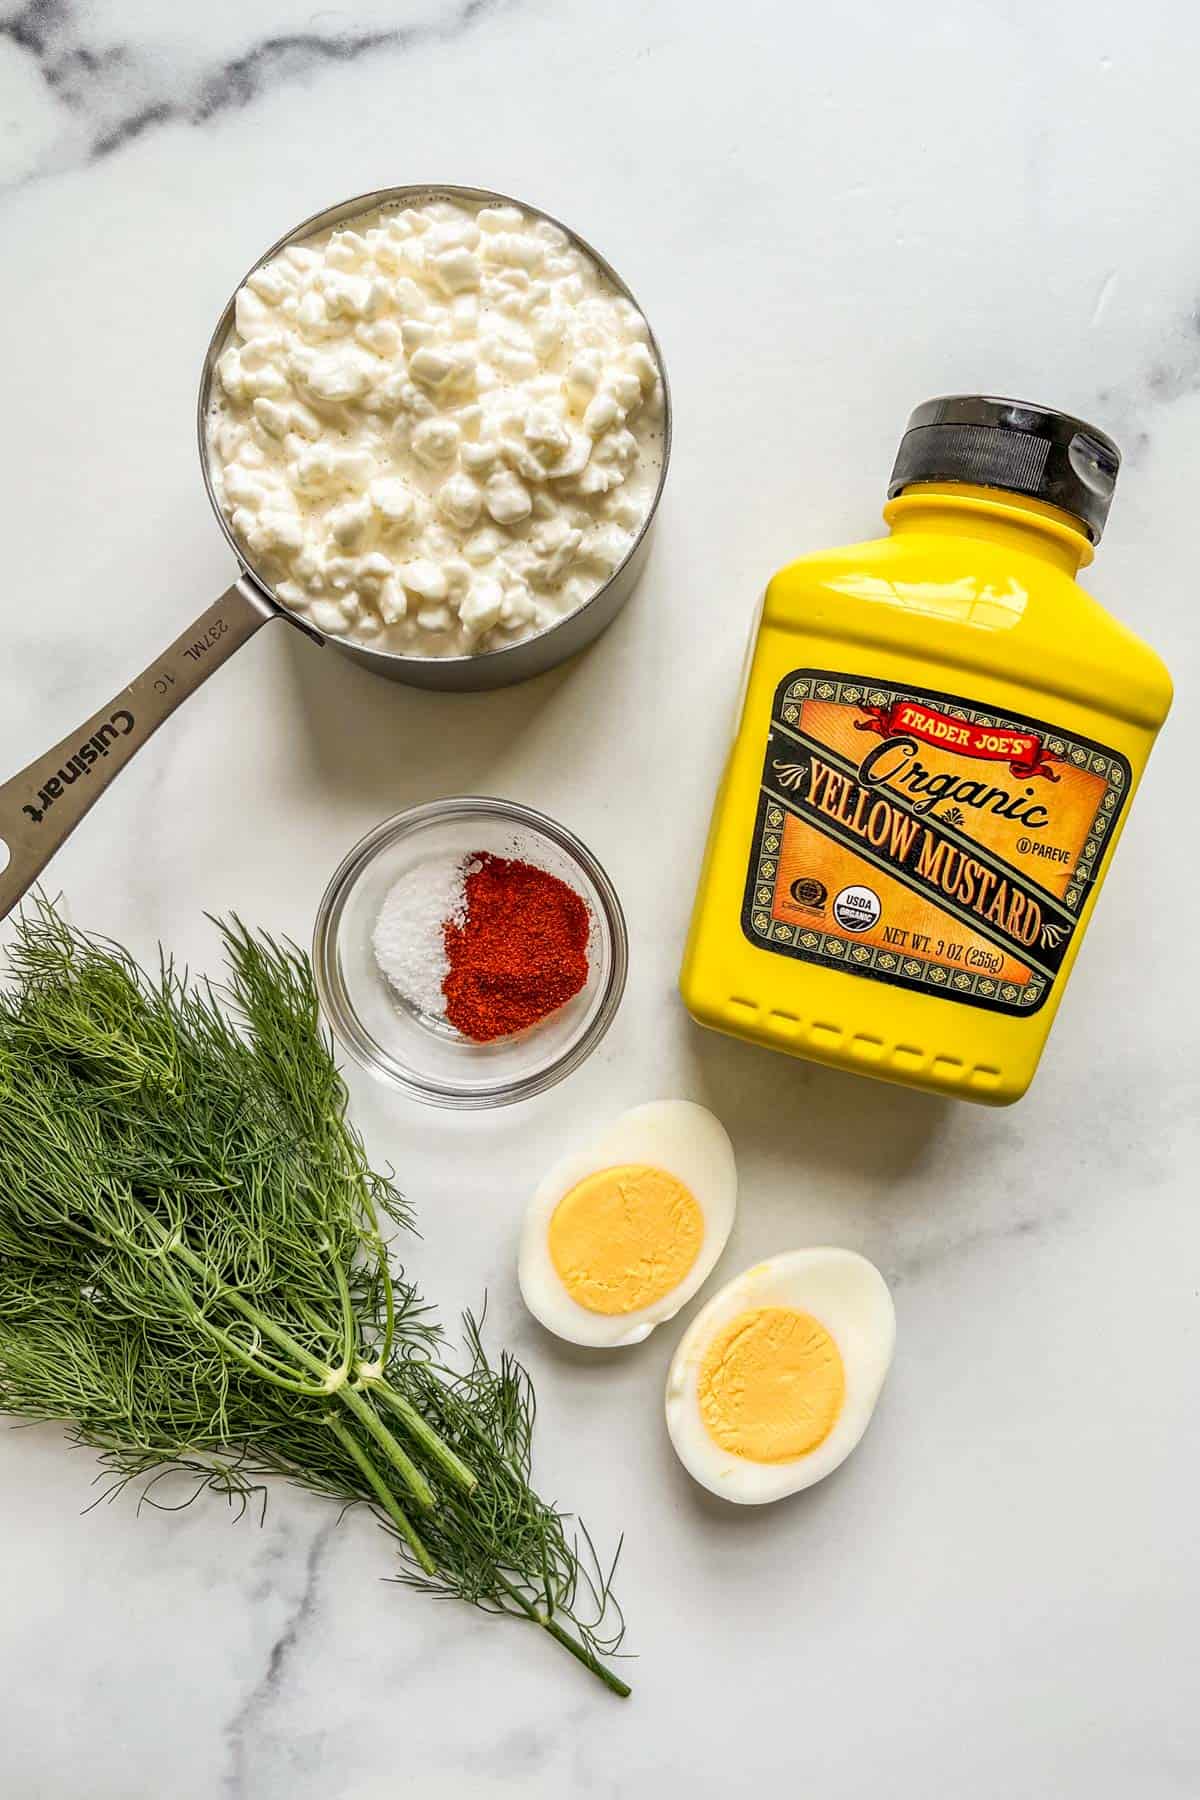 Ingredients for a mustard cottage cheese dip.